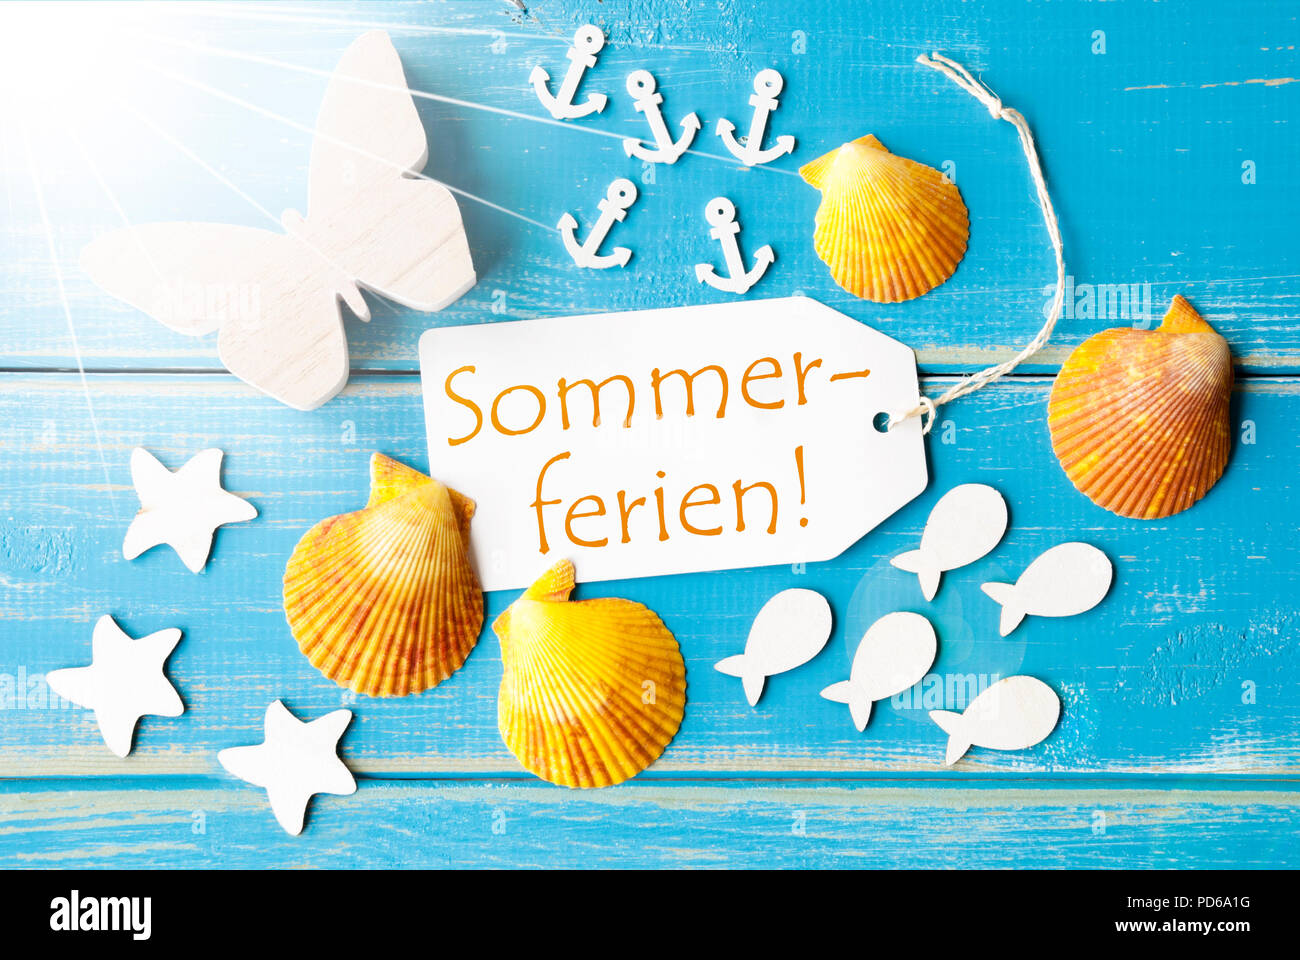 Sunny Greeting Card With Sommerferien Means Summer Holidays Stock Photo